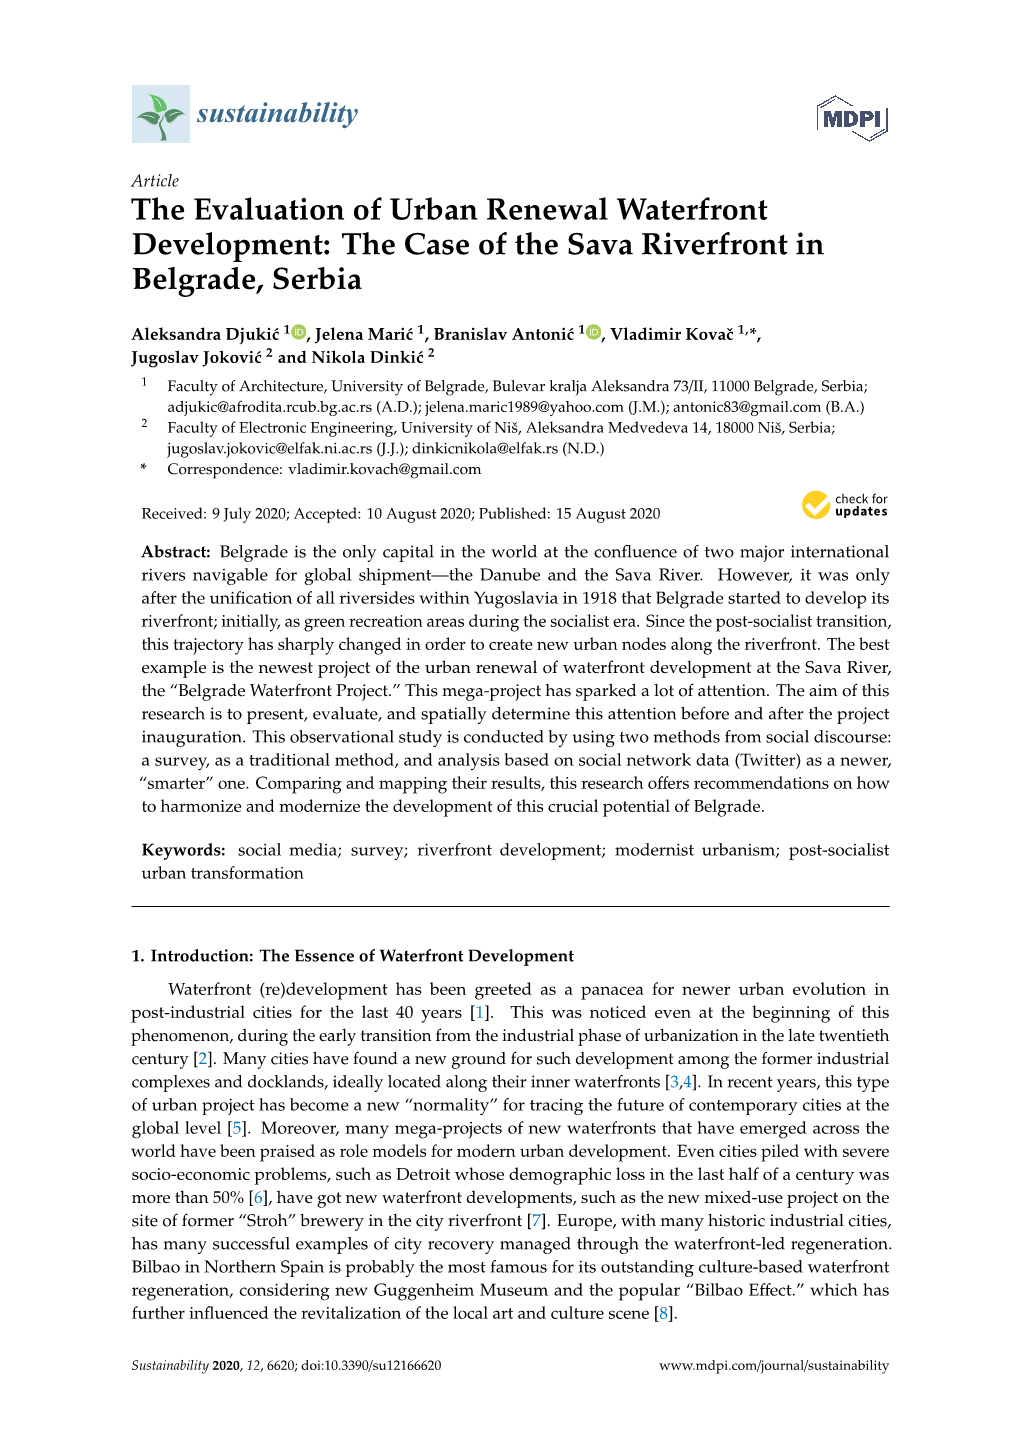 The Evaluation of Urban Renewal Waterfront Development: the Case of the Sava Riverfront in Belgrade, Serbia